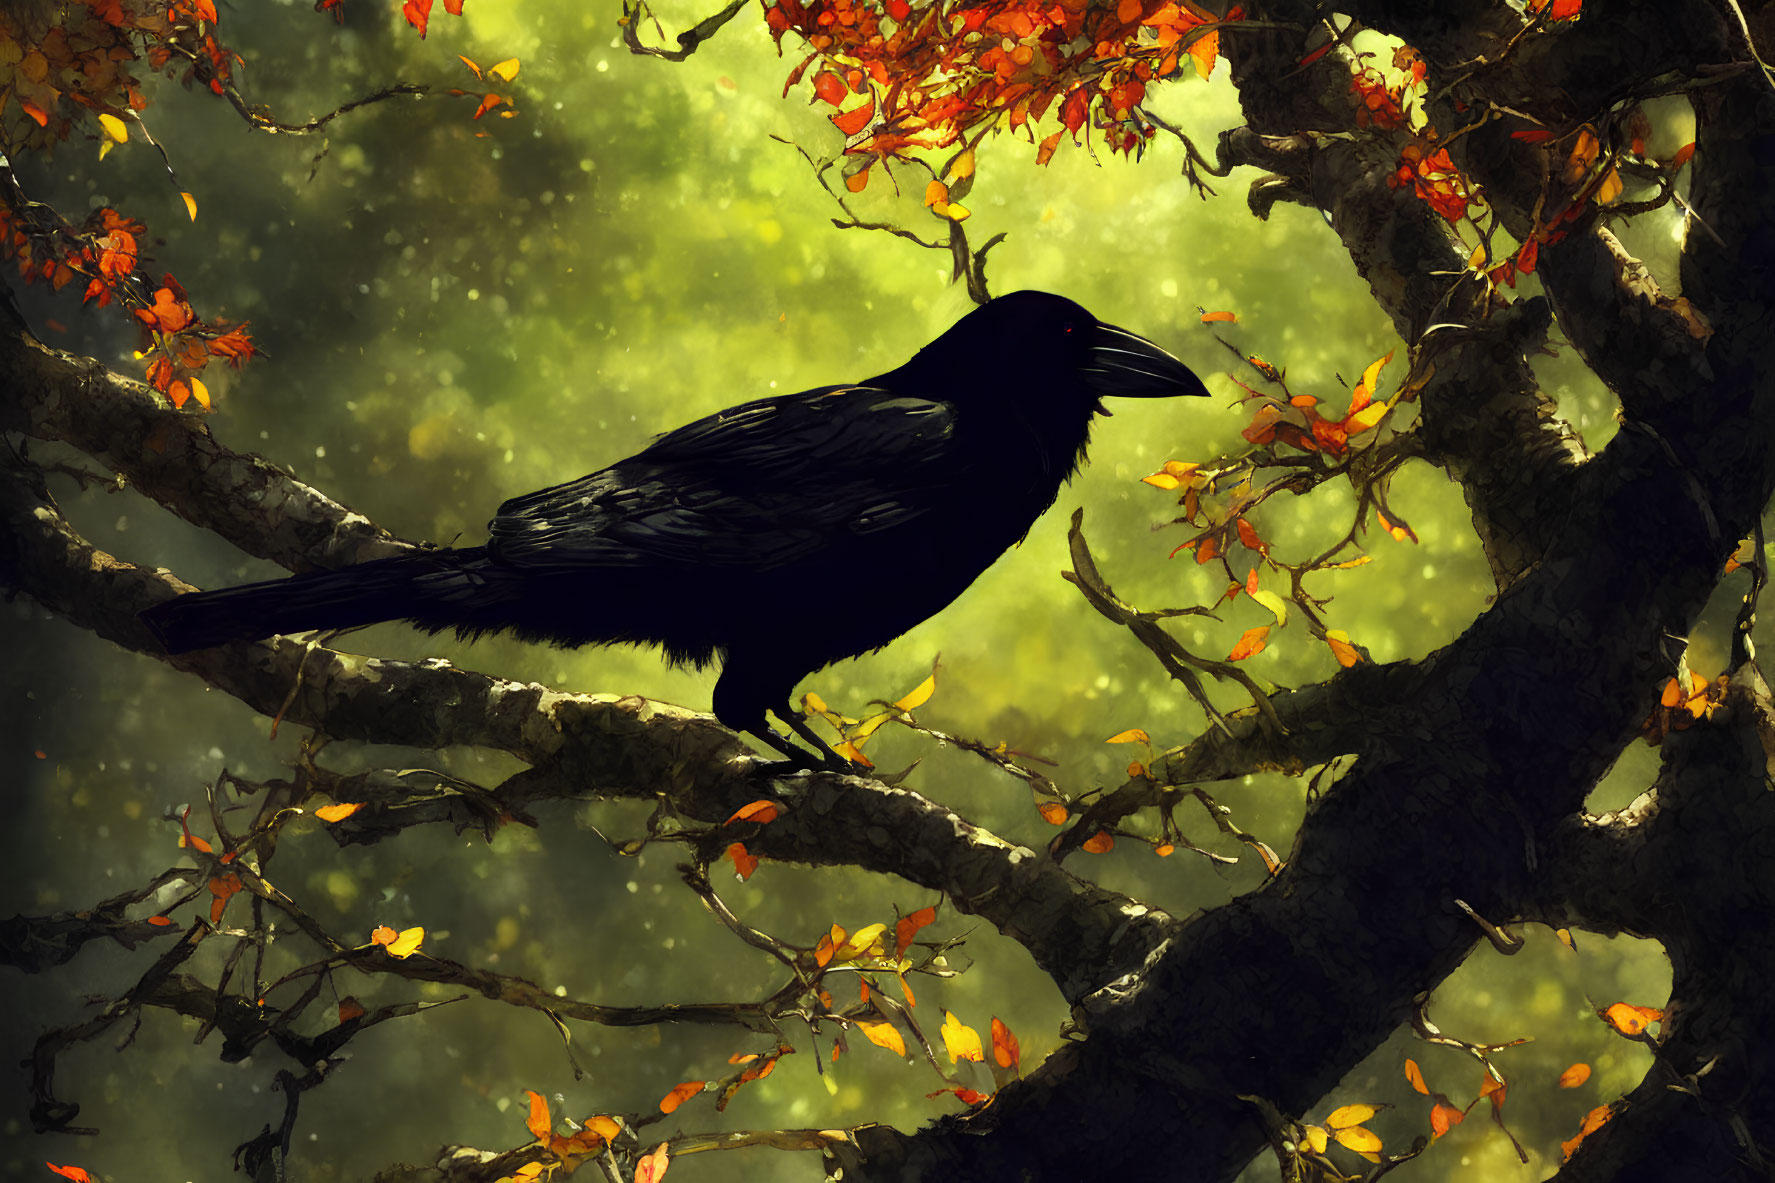 Black raven on twisted branch in autumn setting